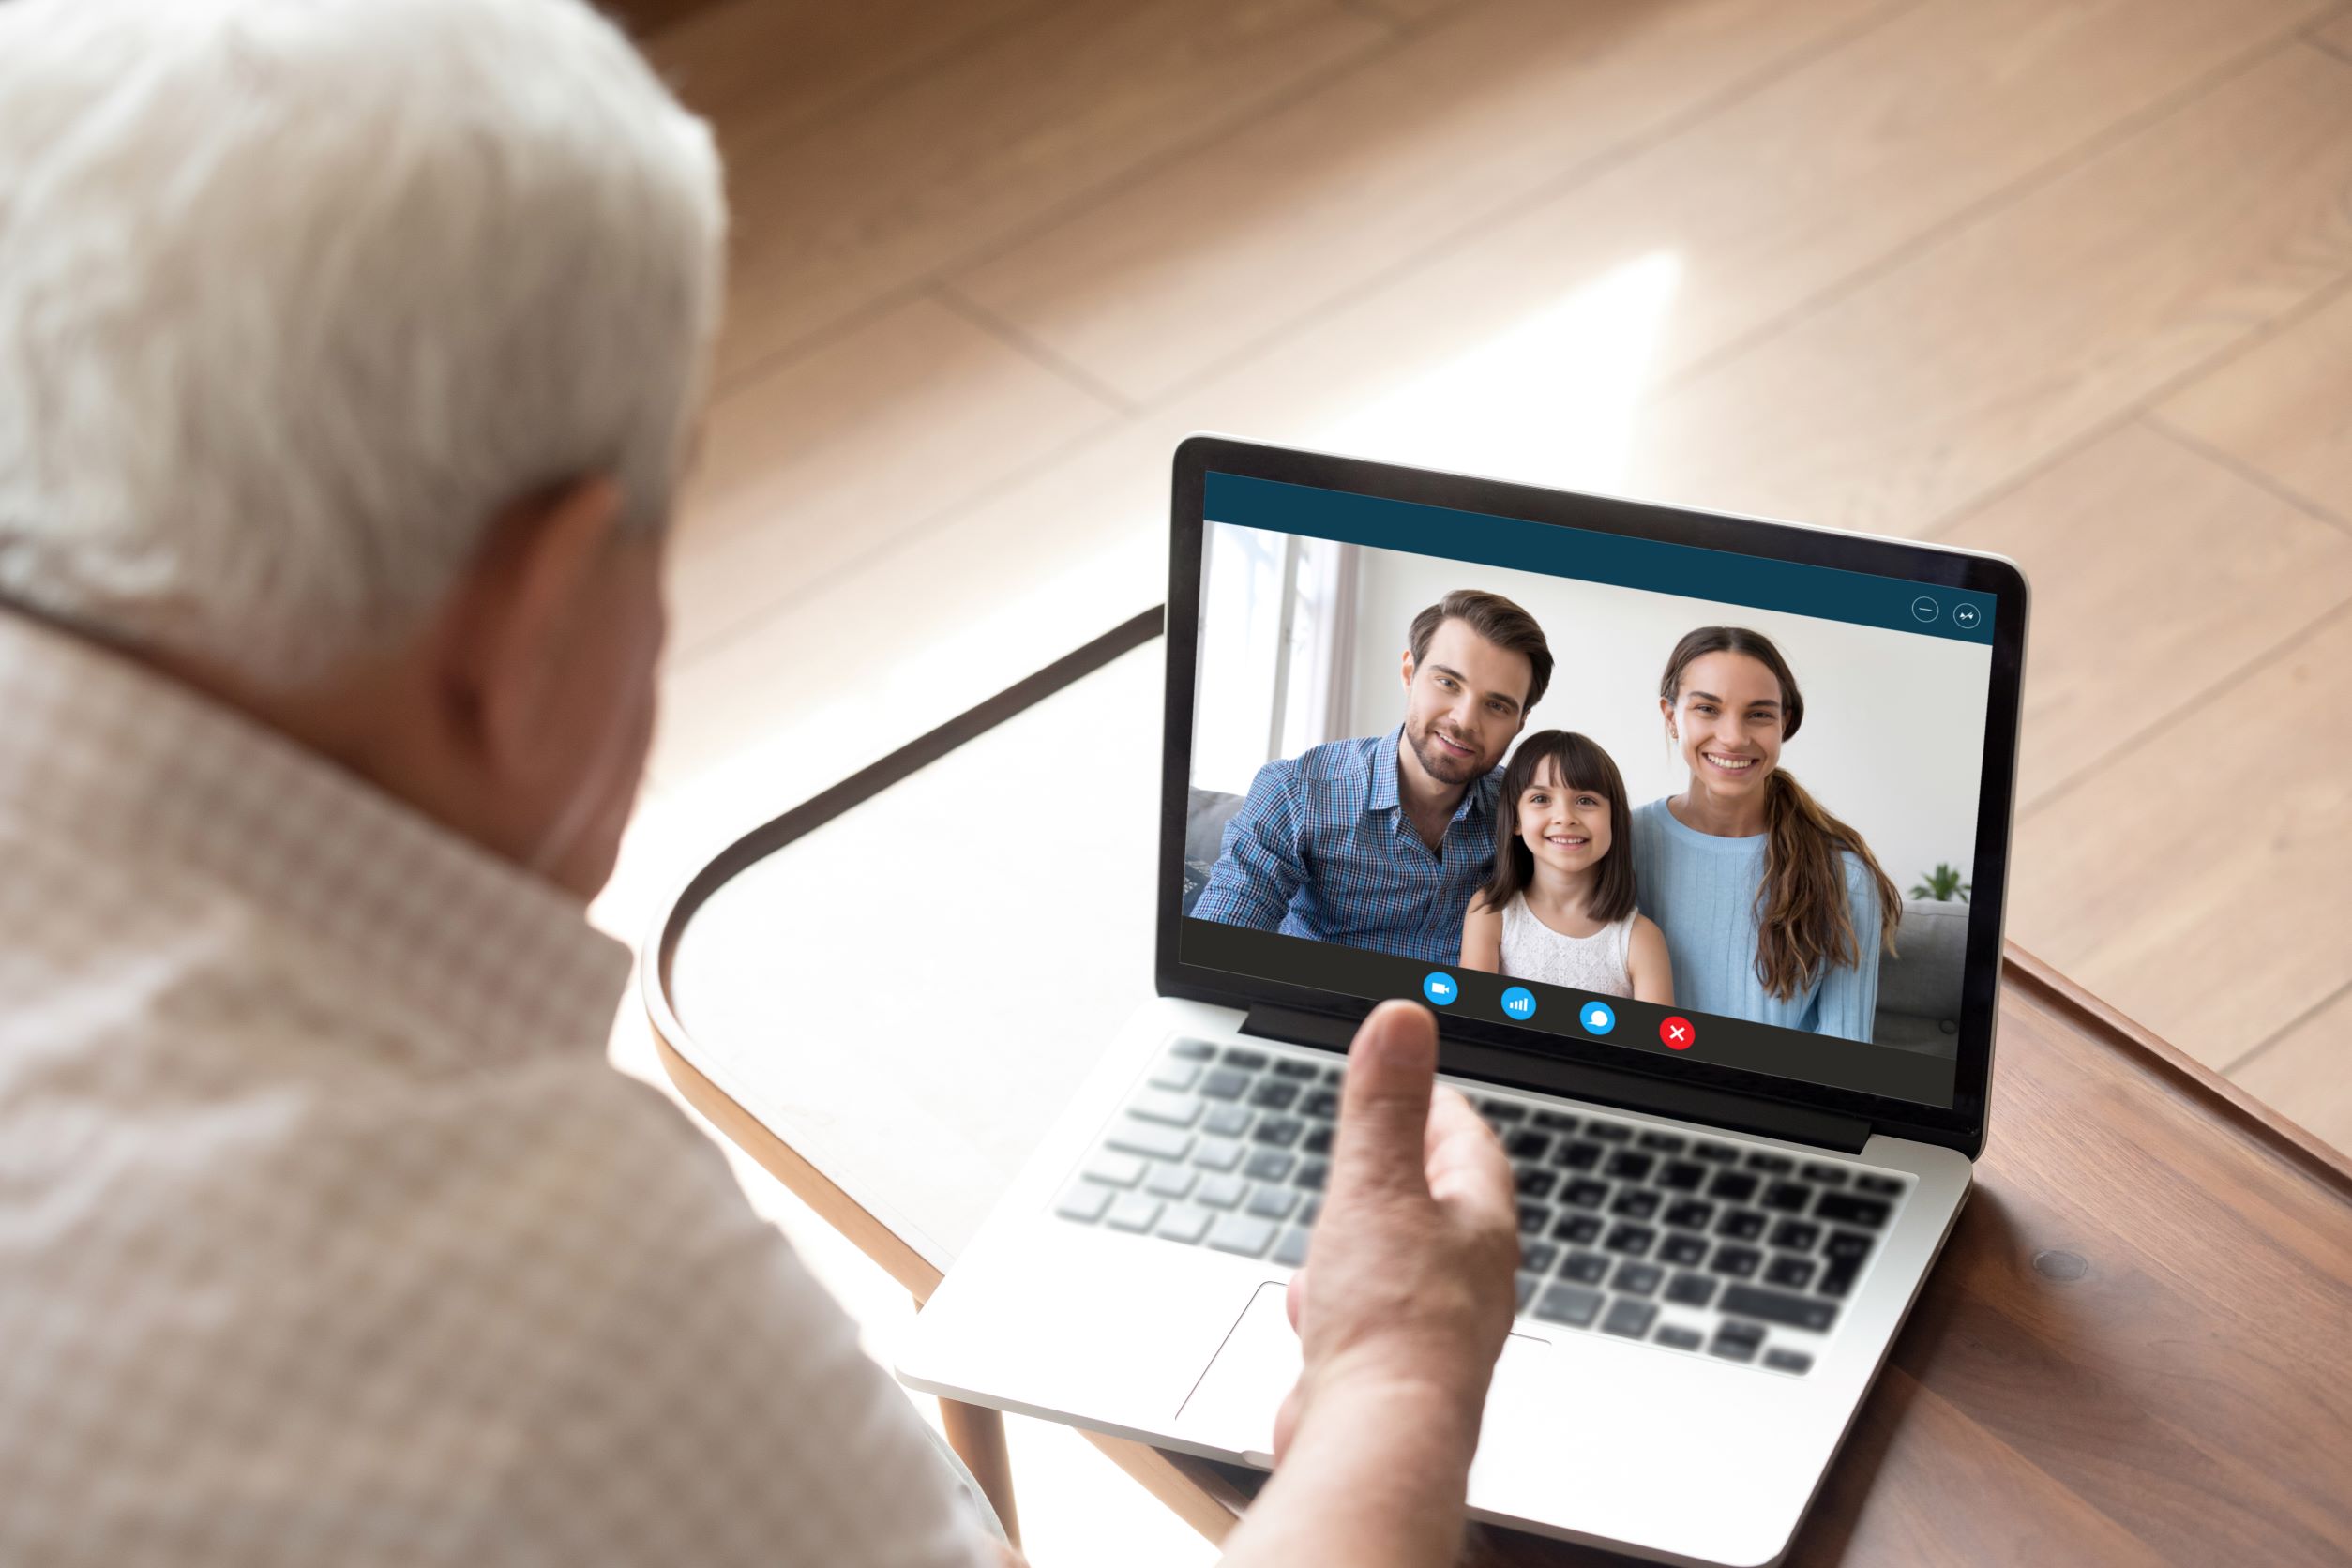 Elderly man on laptop with family